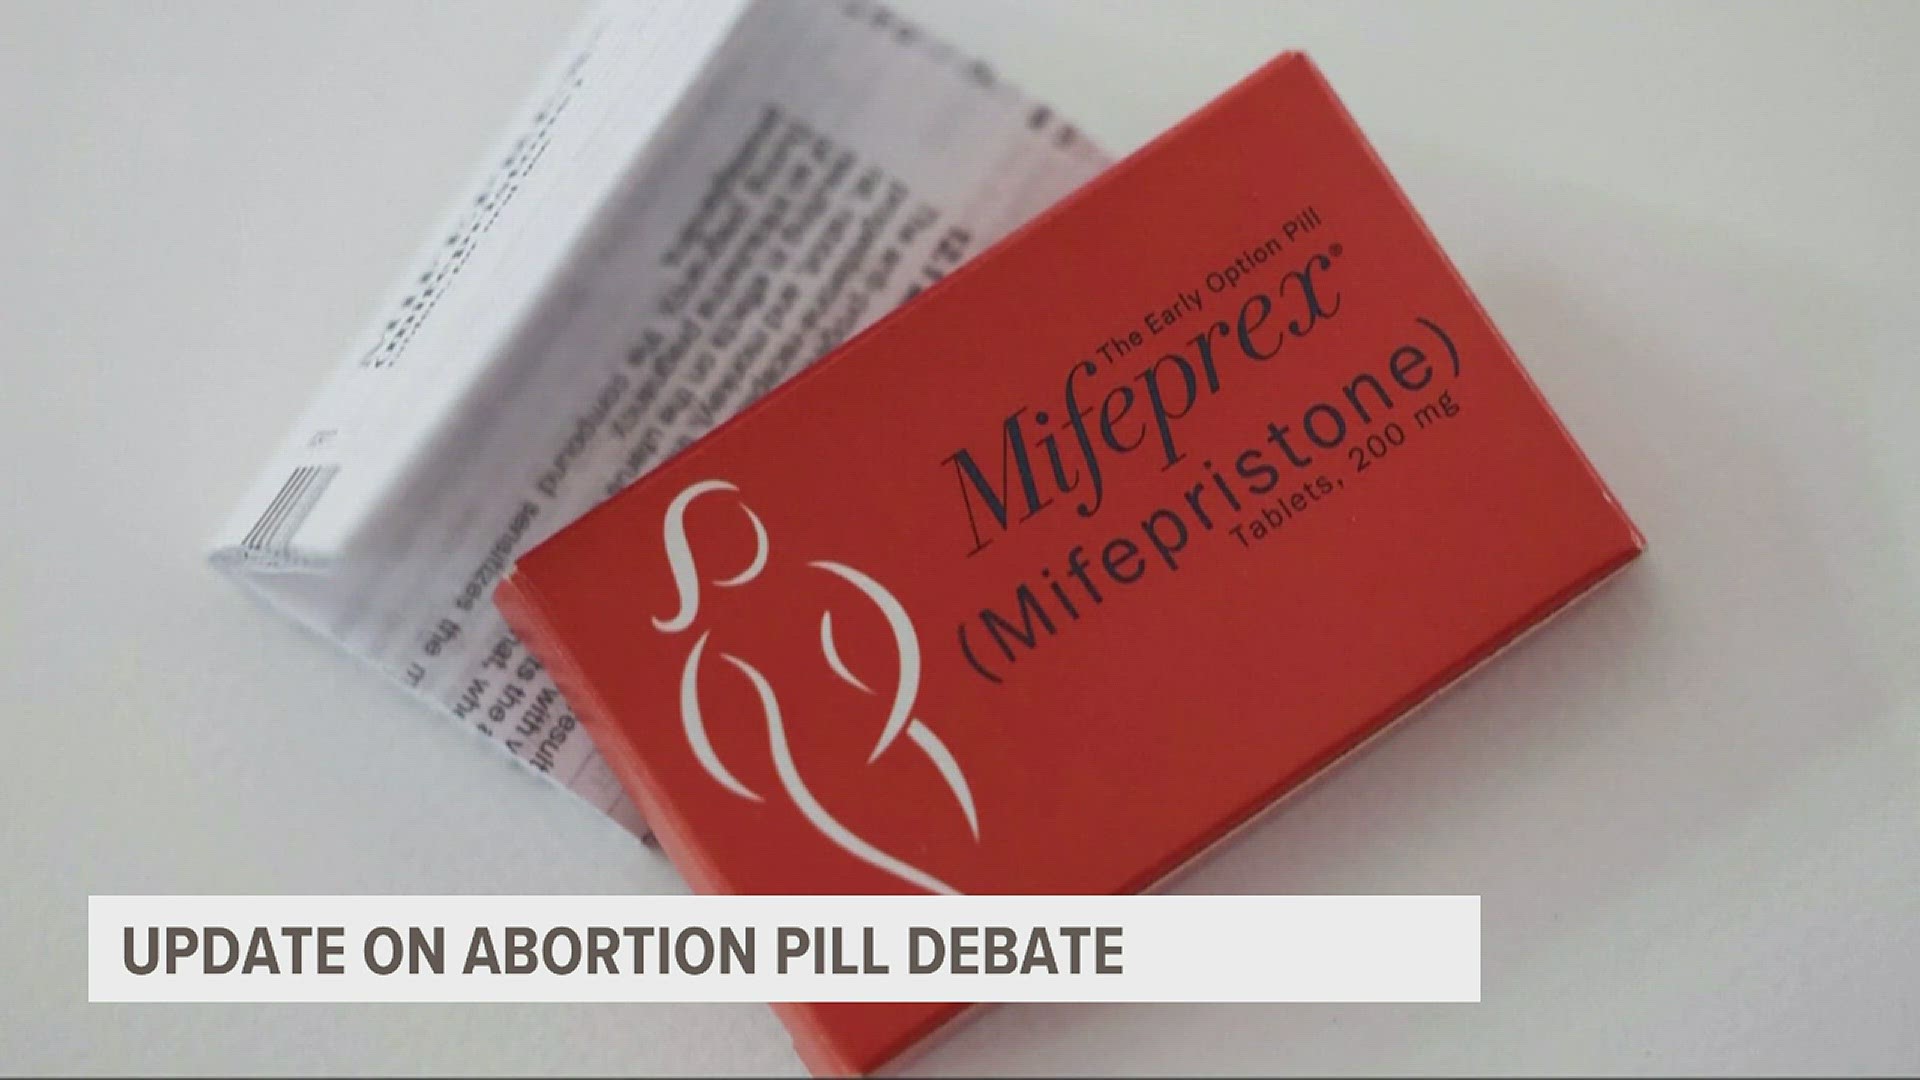 The court ruled to restrict access to mifepristone, used in more than half of US abortions. However, the ruling cannot take effect until the Supreme Court weighs in.